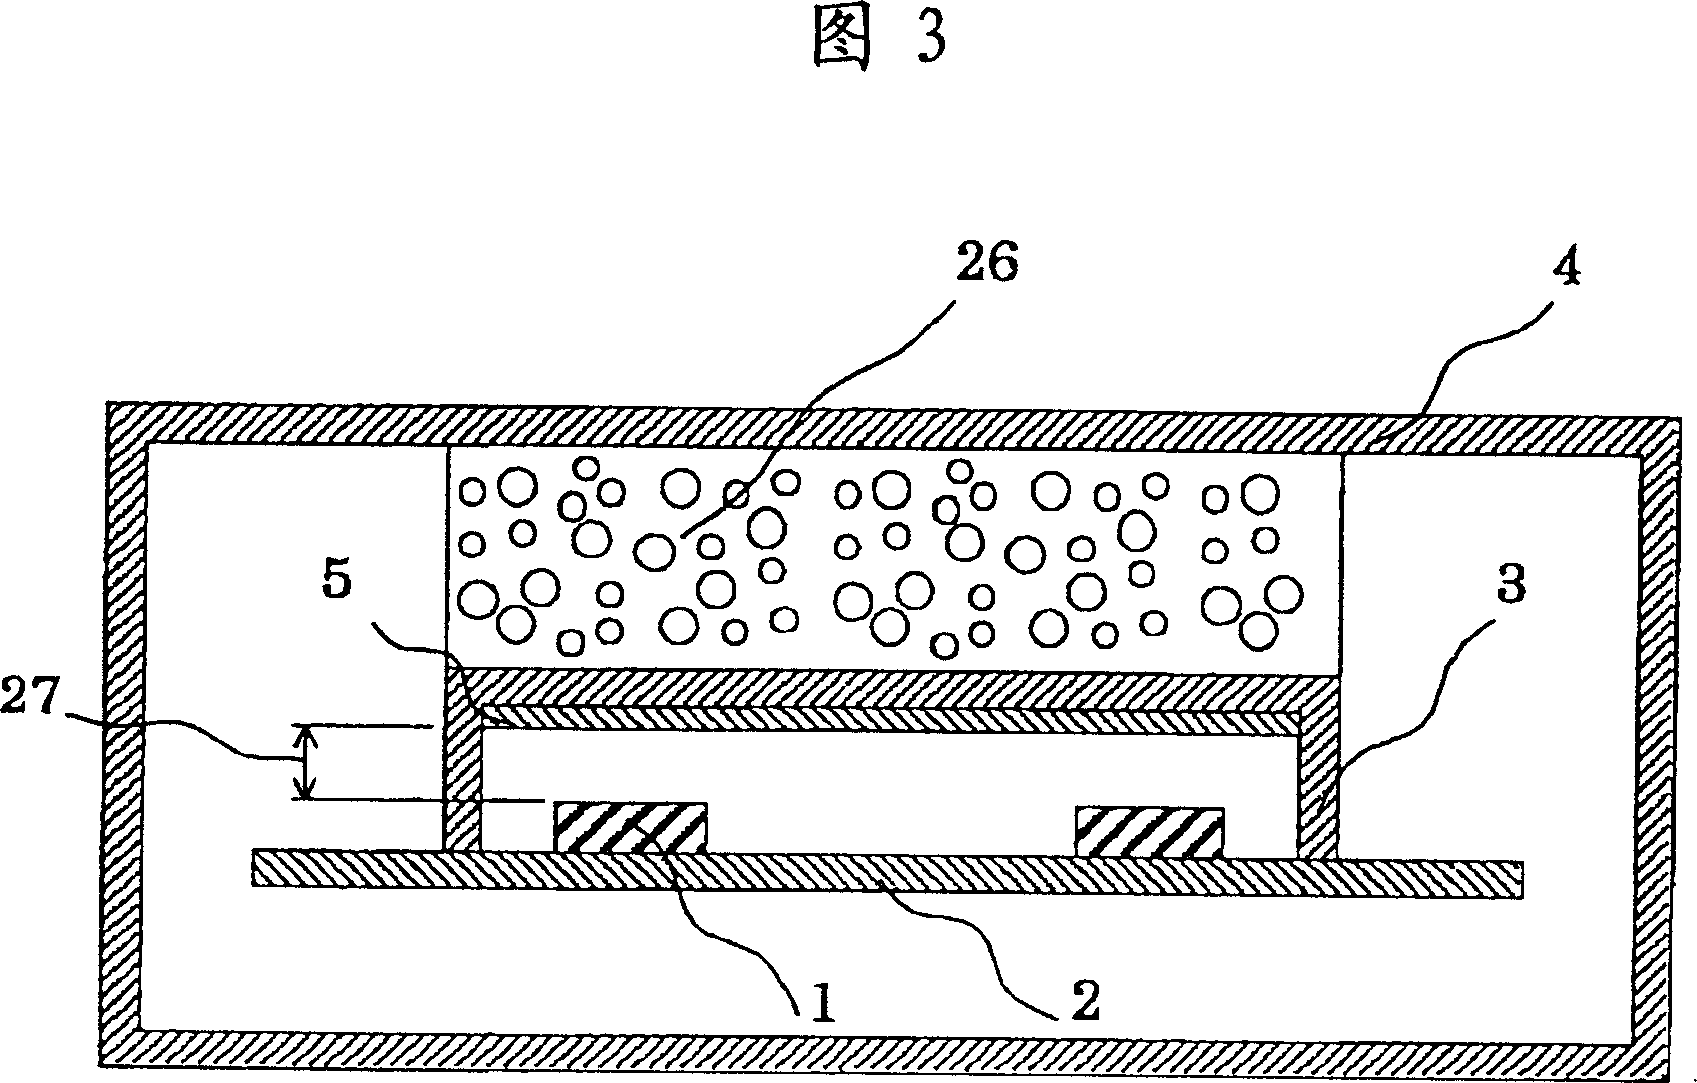 Radiating structure for communicating machine